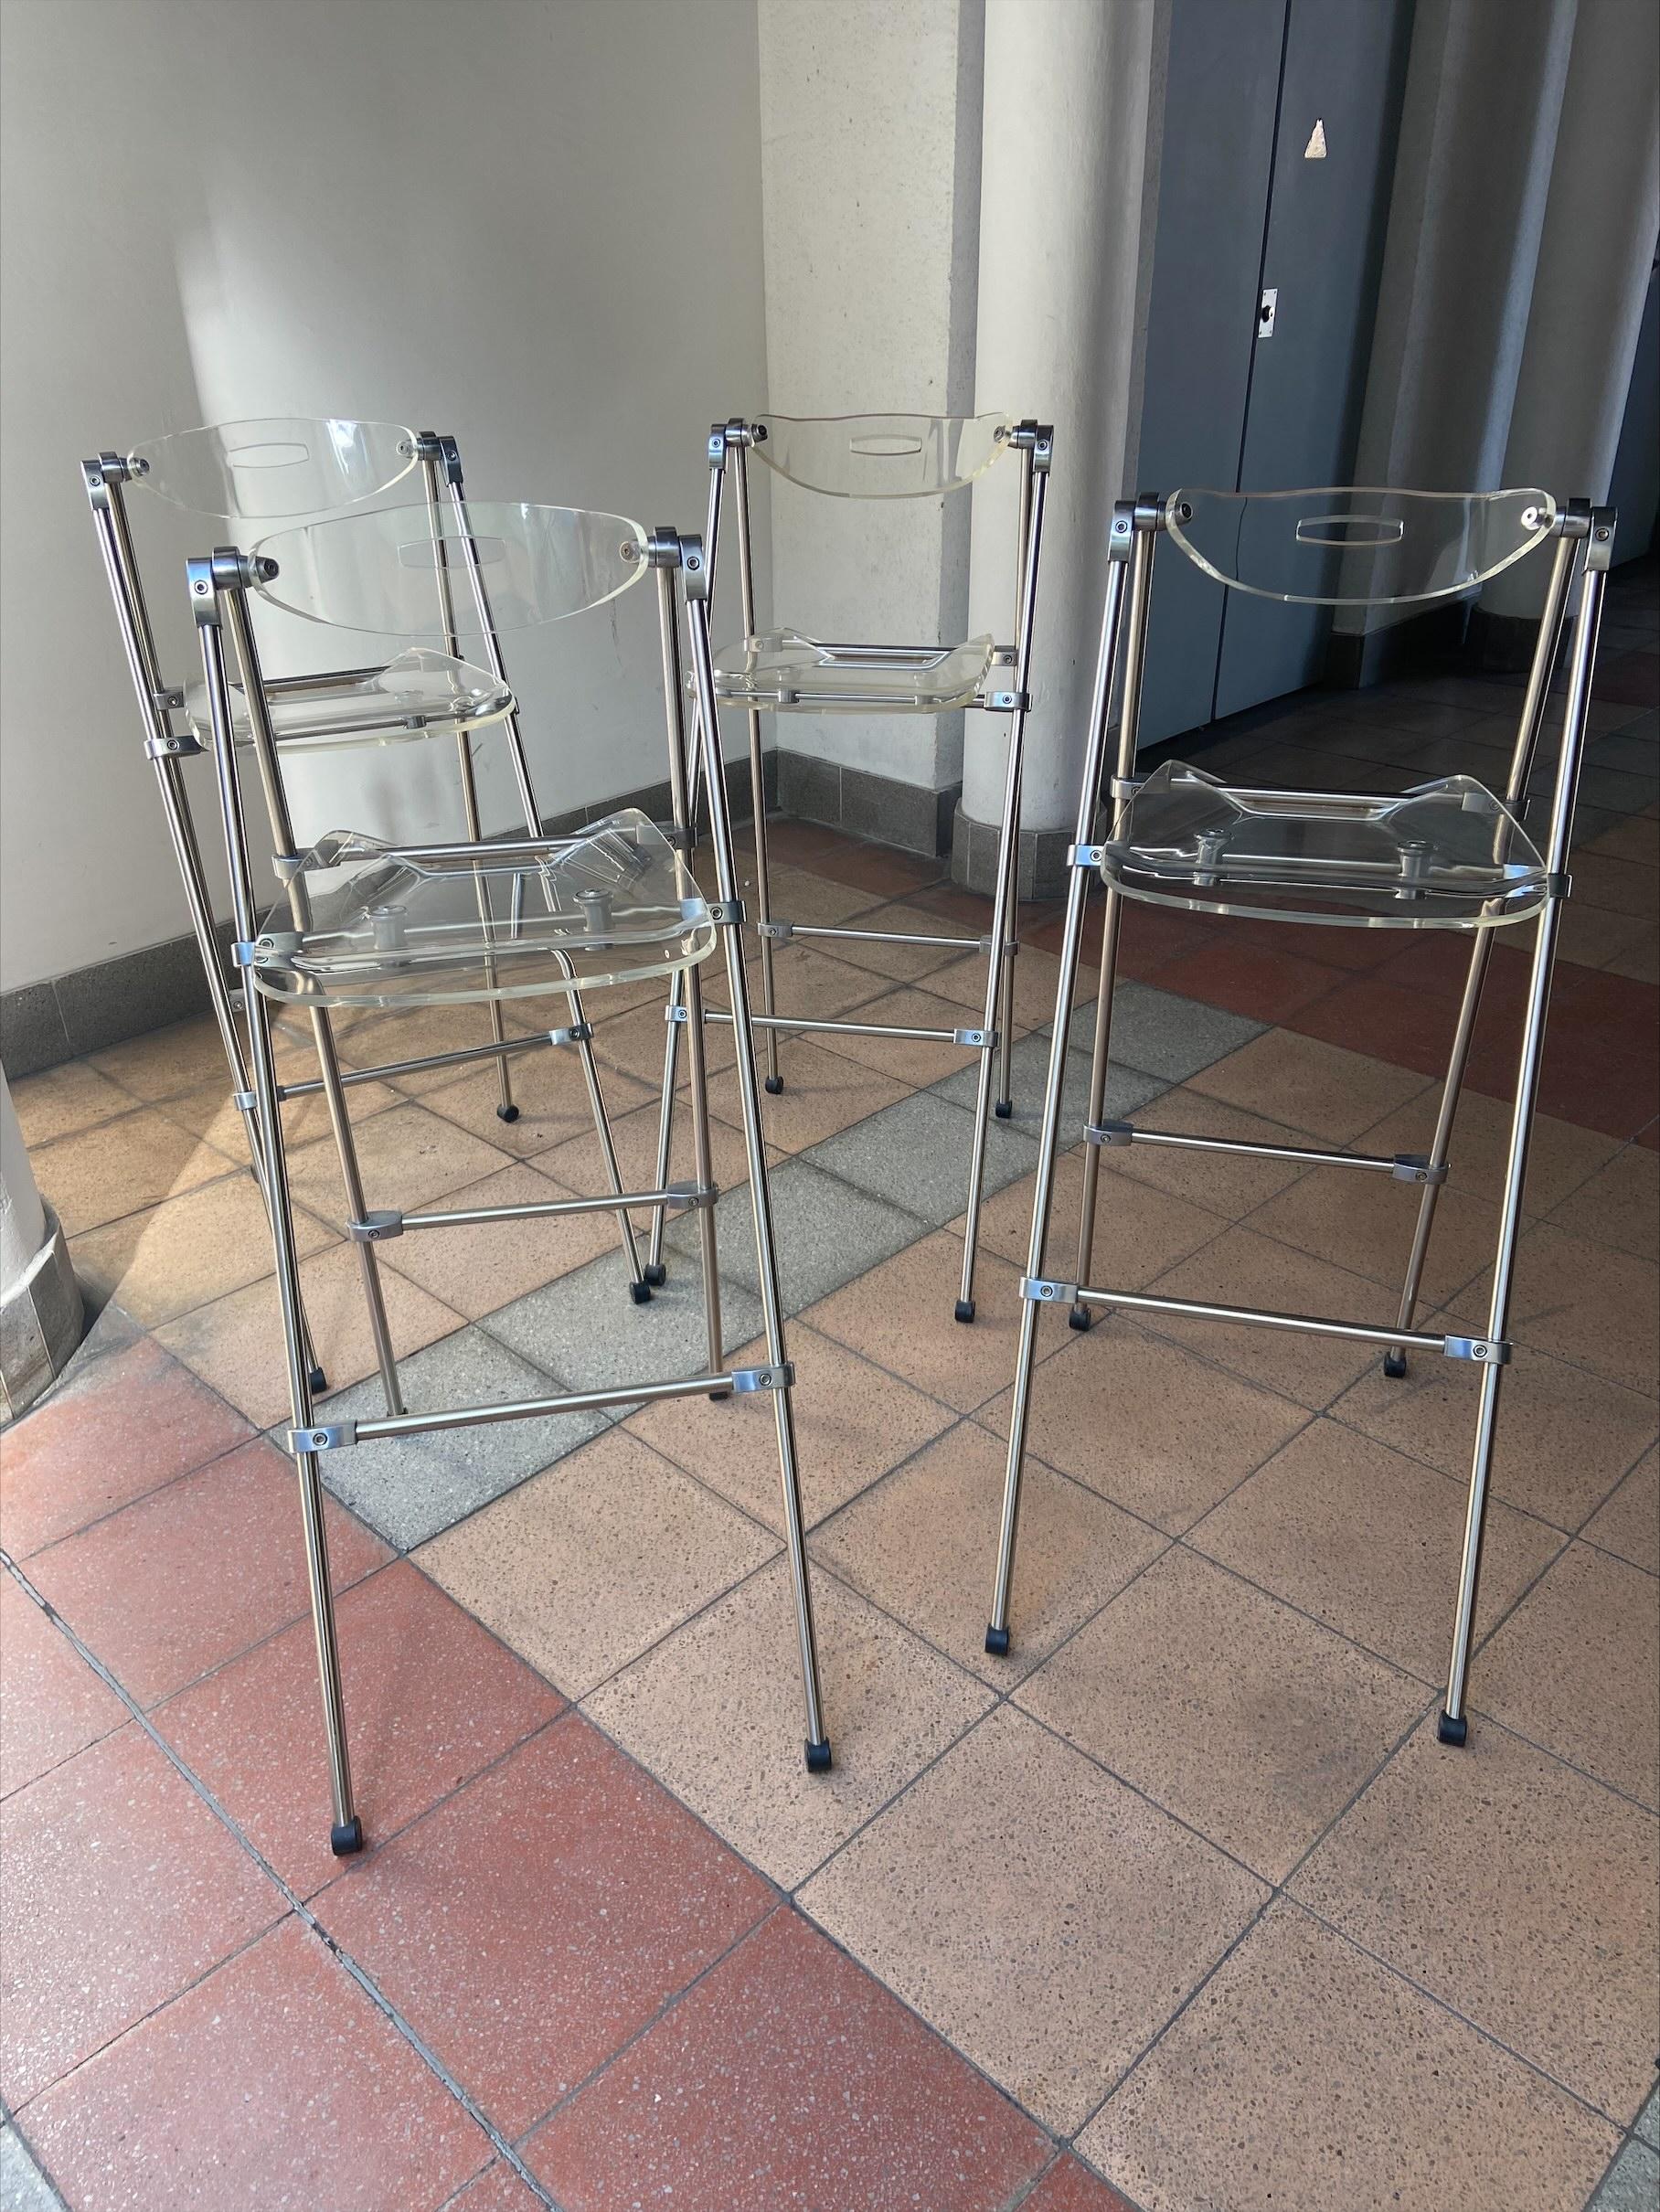 4 Folding Bar Chairs Metal and Clear Plexiglass Island Chairs Kitchen In Good Condition For Sale In Saint Ouen, FR